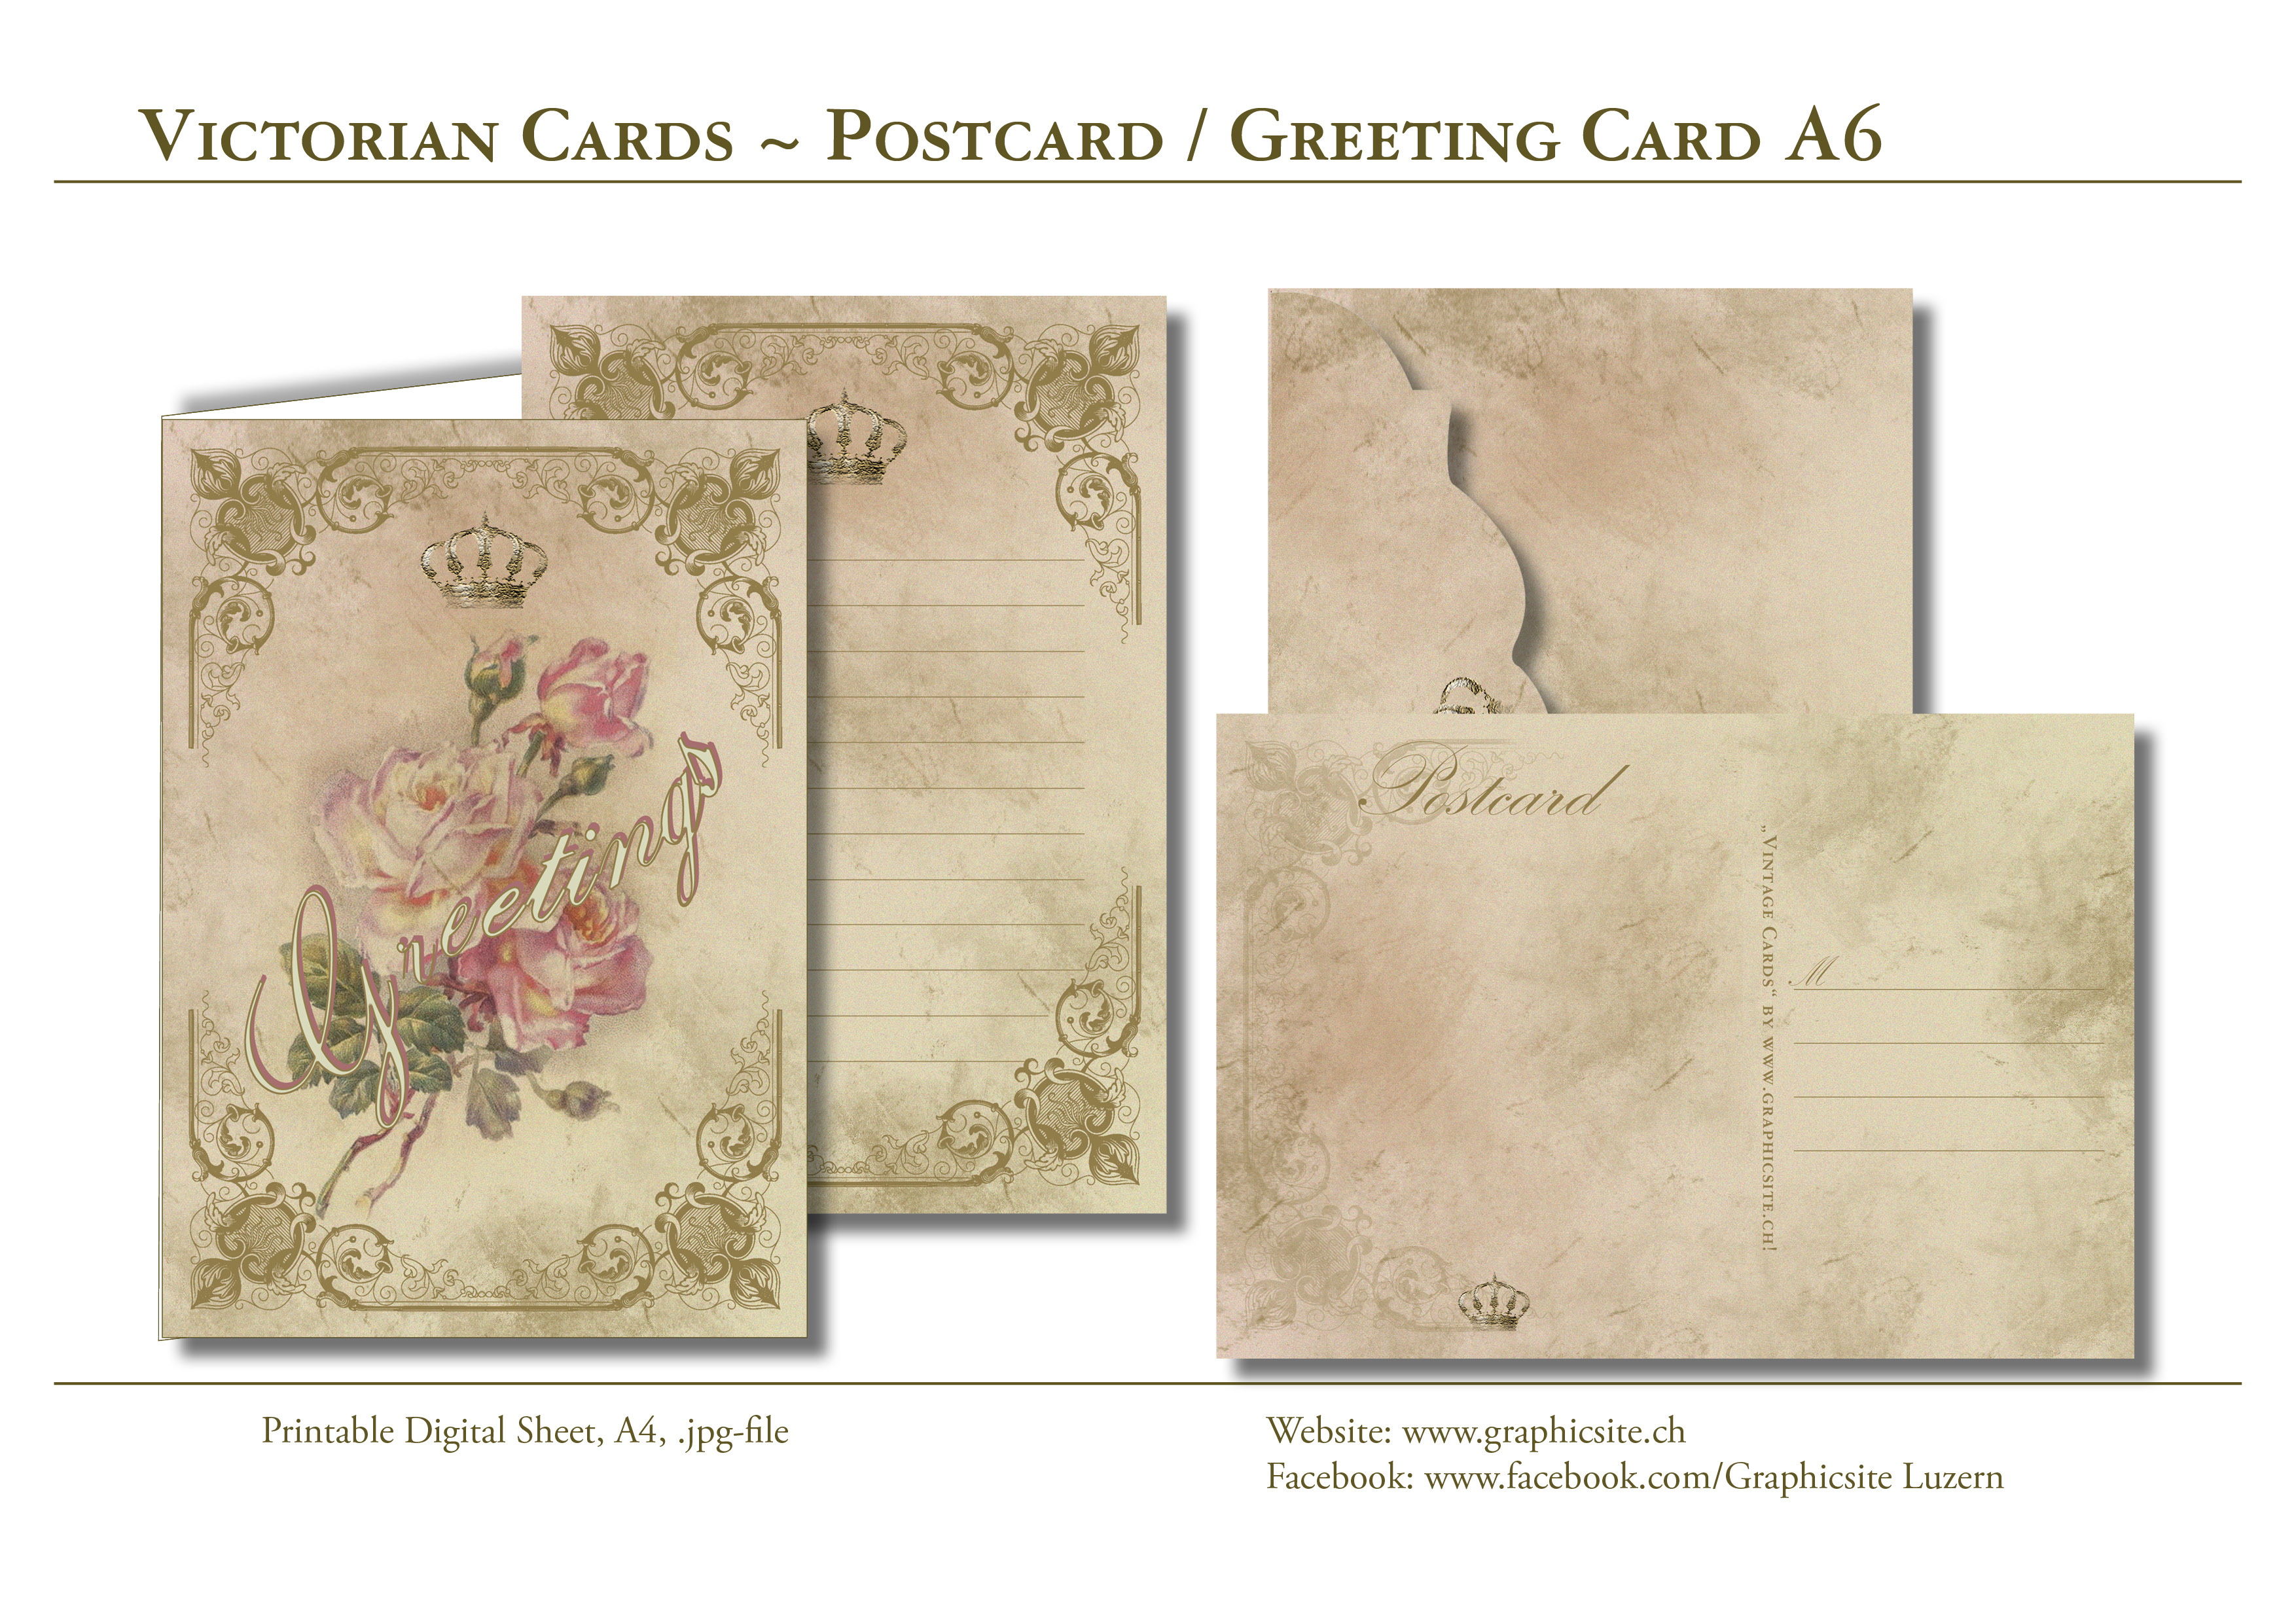 Printable Digital Sheets, CardCollection A6, Download, GreetingCards, Postcard, Victorian,